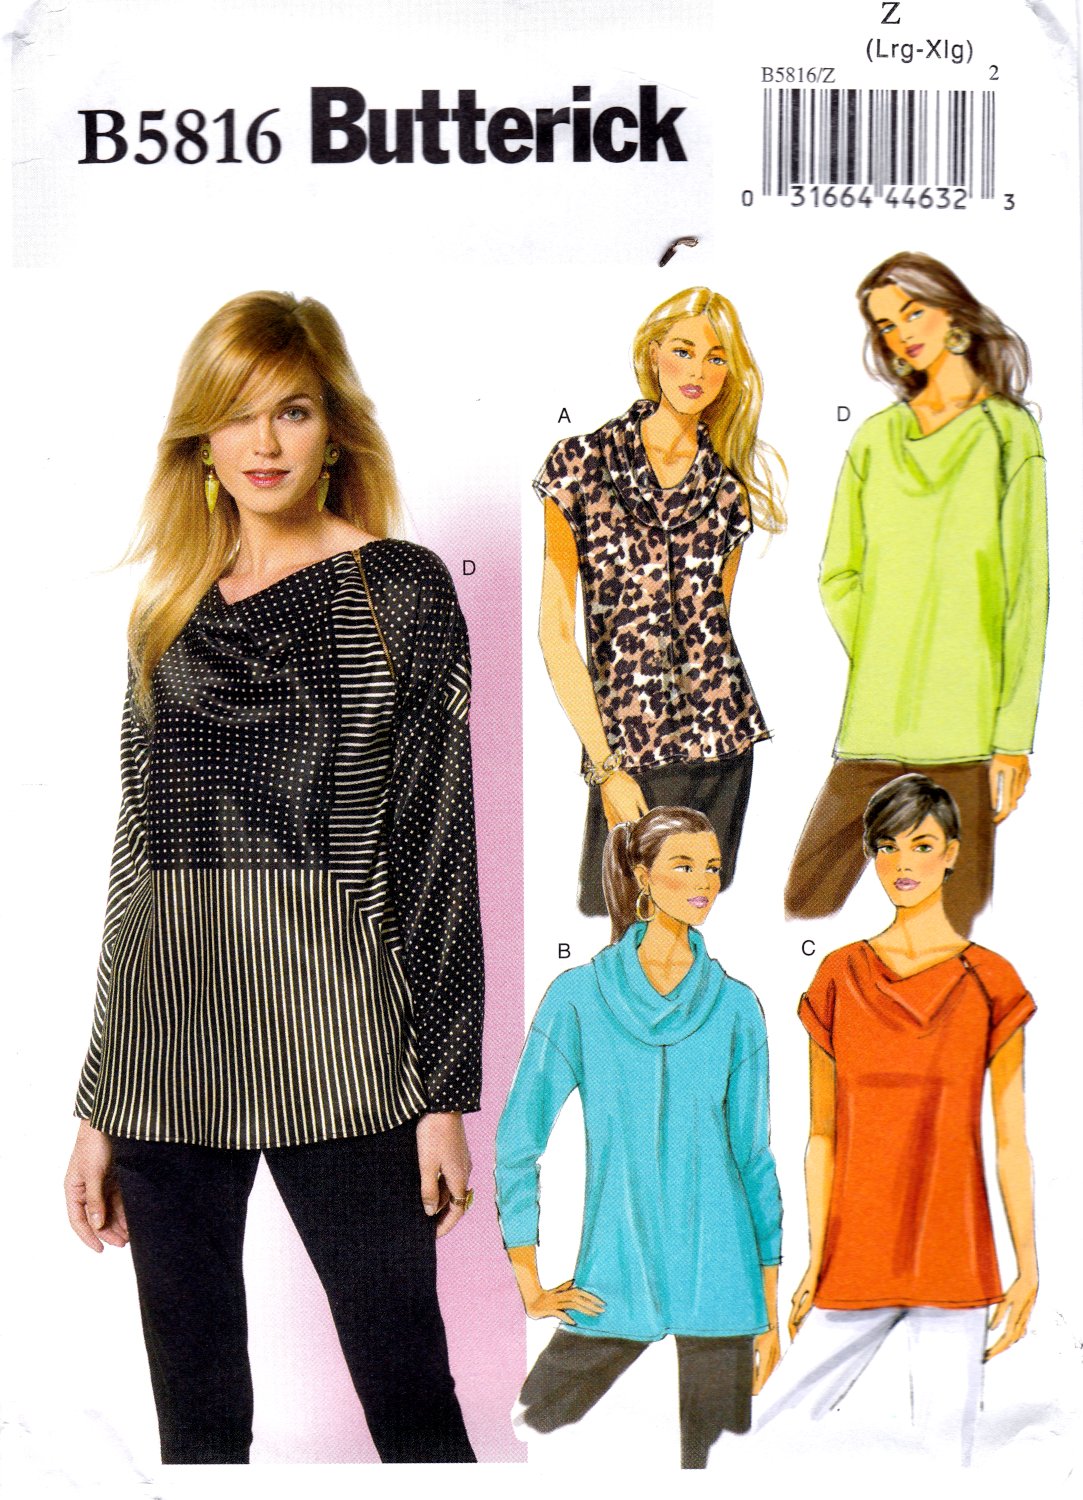 Butterick B5816 Misses Tops Pullover Loose Fitting Sewing Pattern Sizes Lrg-Xlg